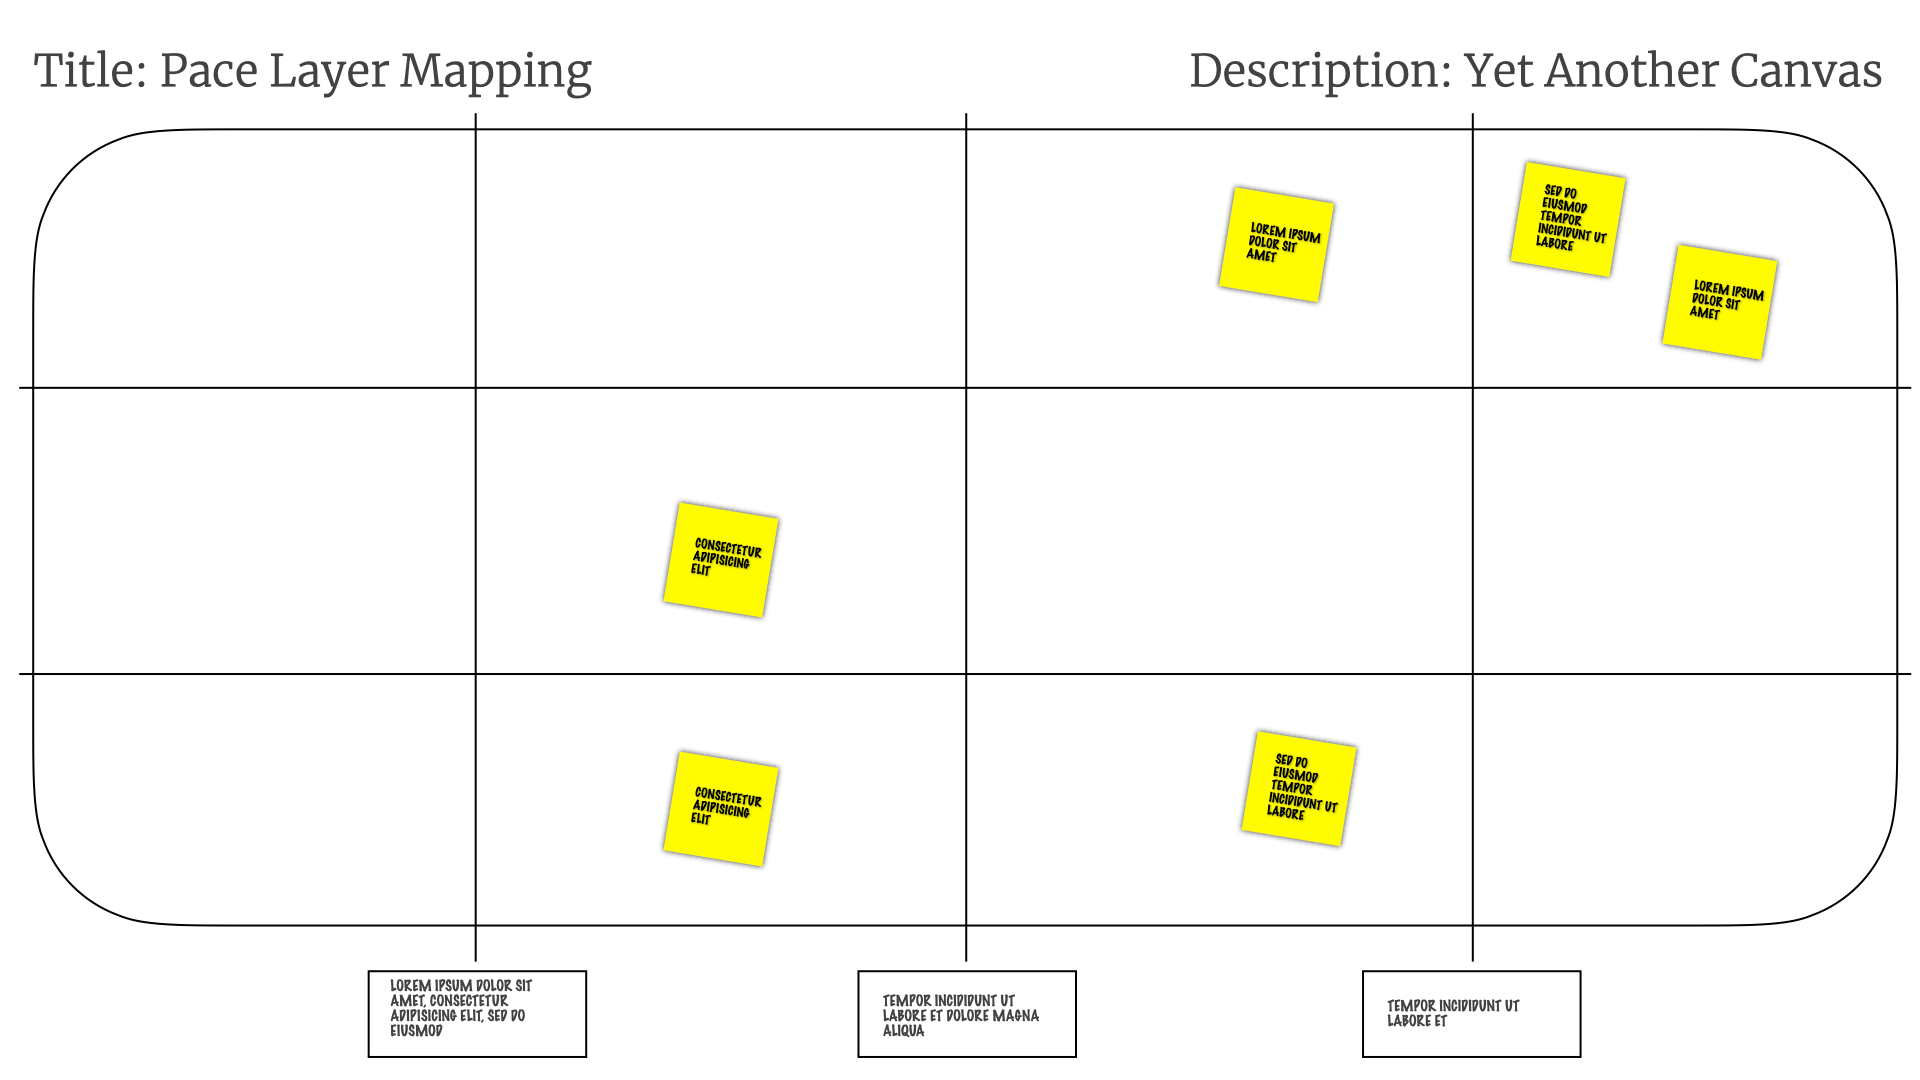 A picture of a grid titled 'pace layer mapping' with a description of 'yet another canvas' — four horizontal squares by 3 vertical. A few yellow post-it notes are sprinkled across the squares.